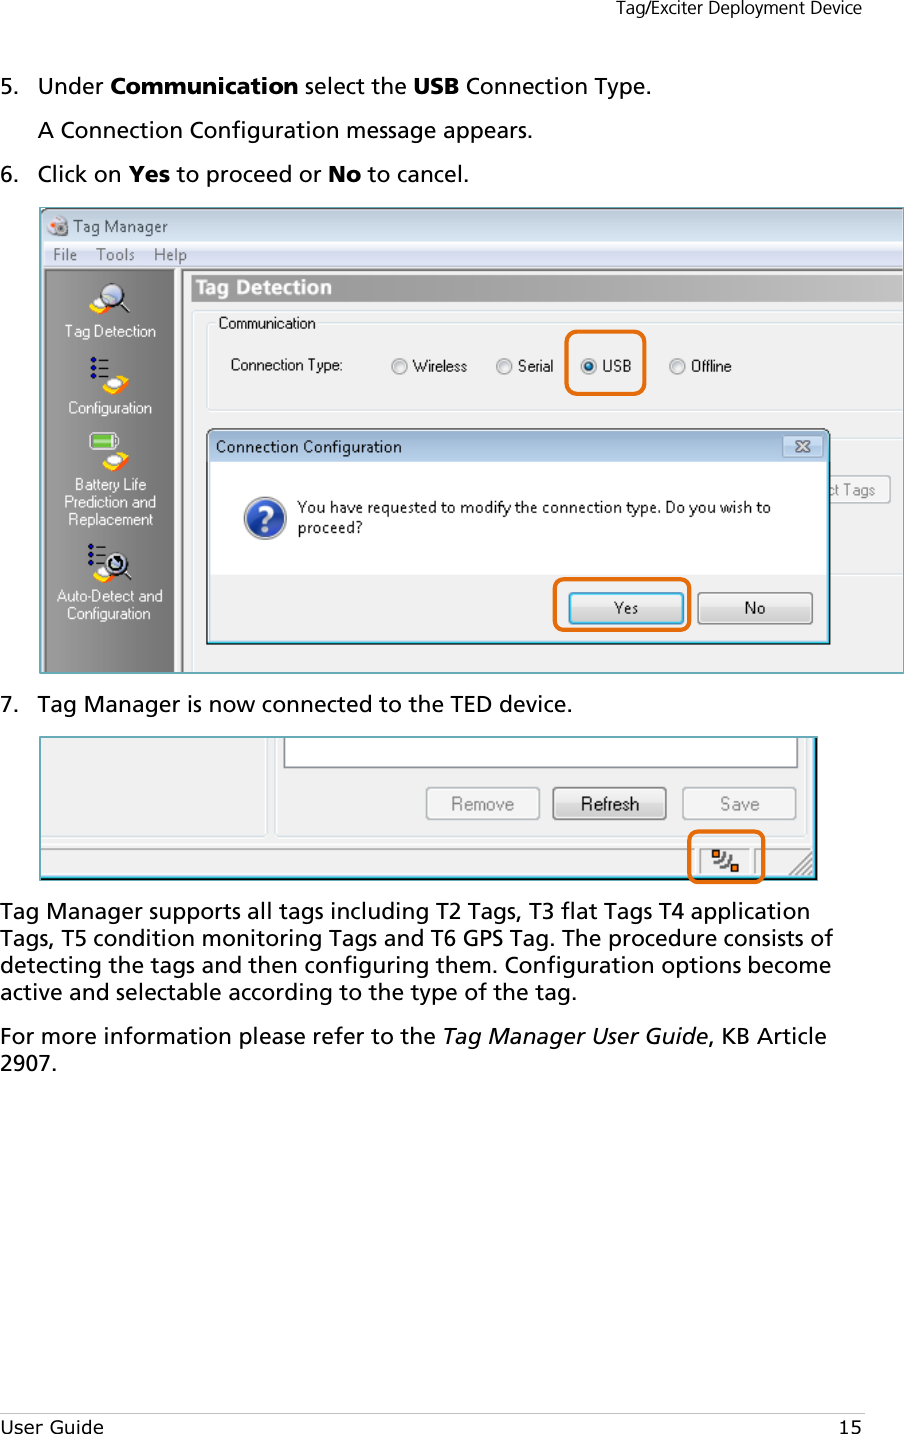 Tag/Exciter Deployment Device User Guide 15  Under Communication select the USB Connection Type. 5.A Connection Configuration message appears.  Click on Yes to proceed or No to cancel. 6.  Tag Manager is now connected to the TED device. 7. Tag Manager supports all tags including T2 Tags, T3 flat Tags T4 application Tags, T5 condition monitoring Tags and T6 GPS Tag. The procedure consists of detecting the tags and then configuring them. Configuration options become active and selectable according to the type of the tag. For more information please refer to the Tag Manager User Guide, KB Article 2907.        